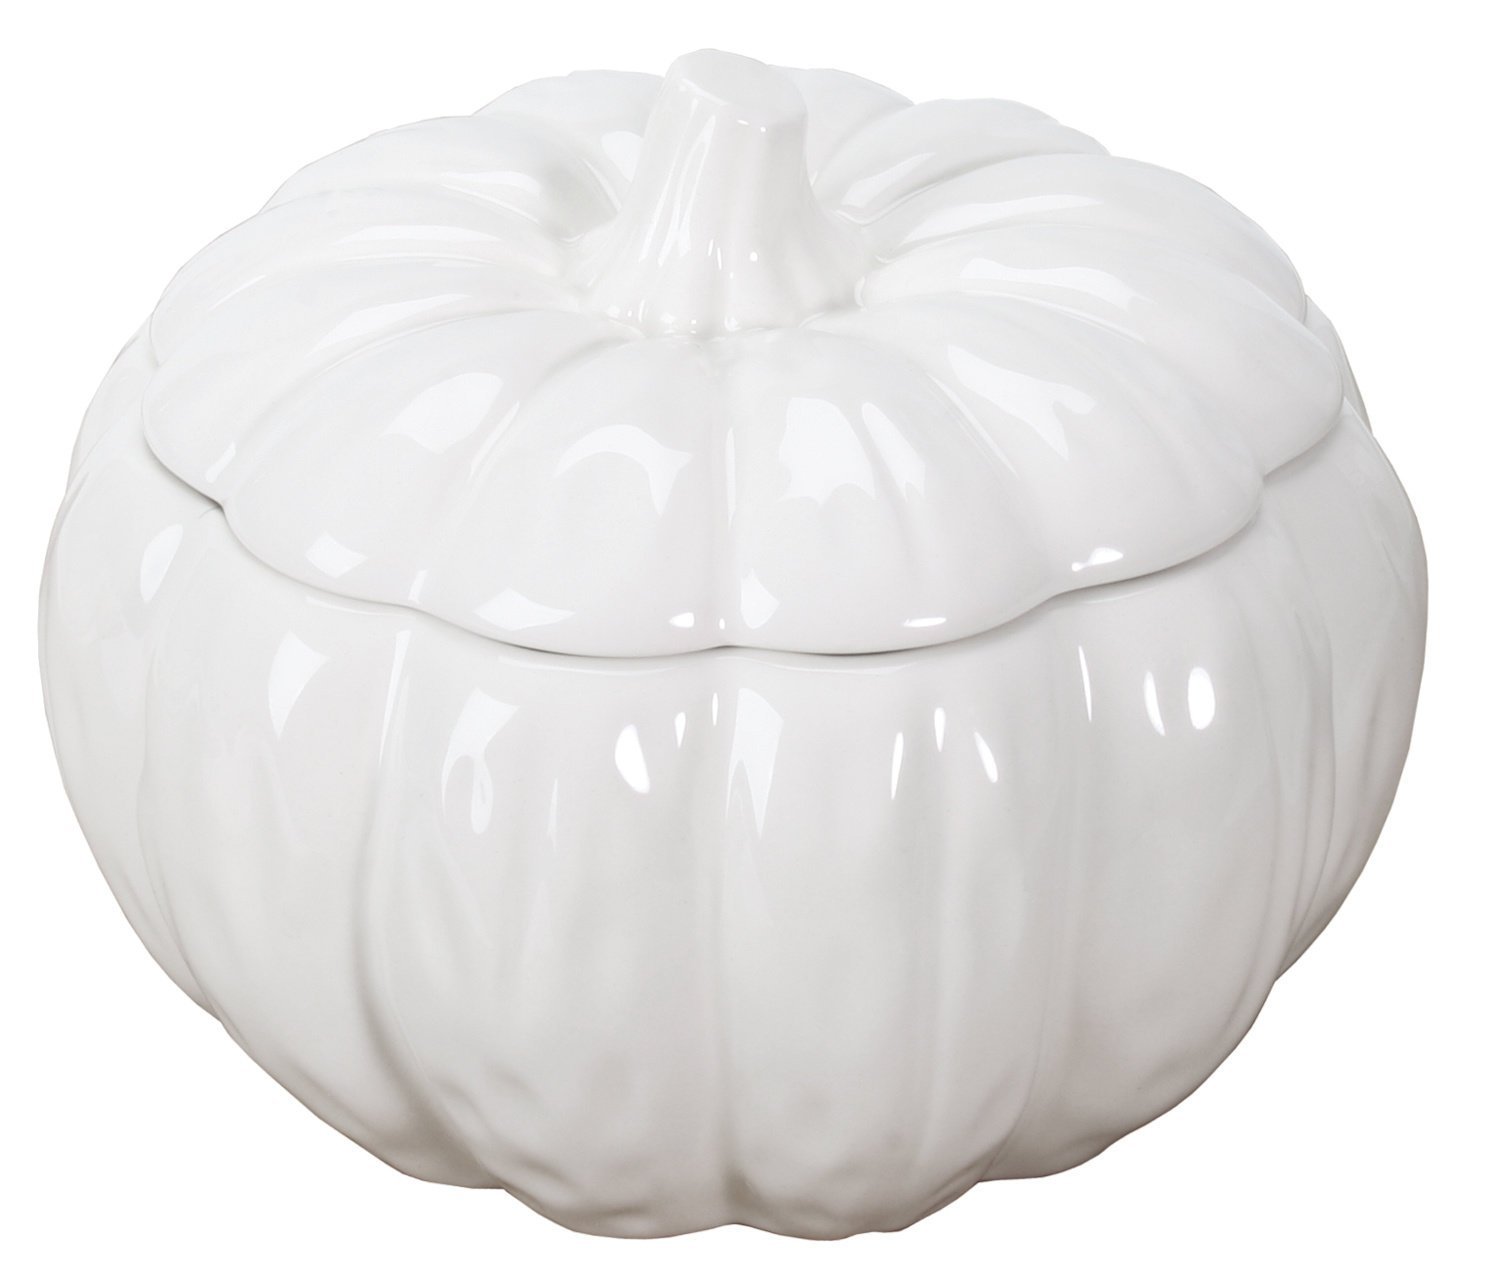 Amazon.com | Ceramic Pumpkin Round Soup Bowl Container with Fitting ...